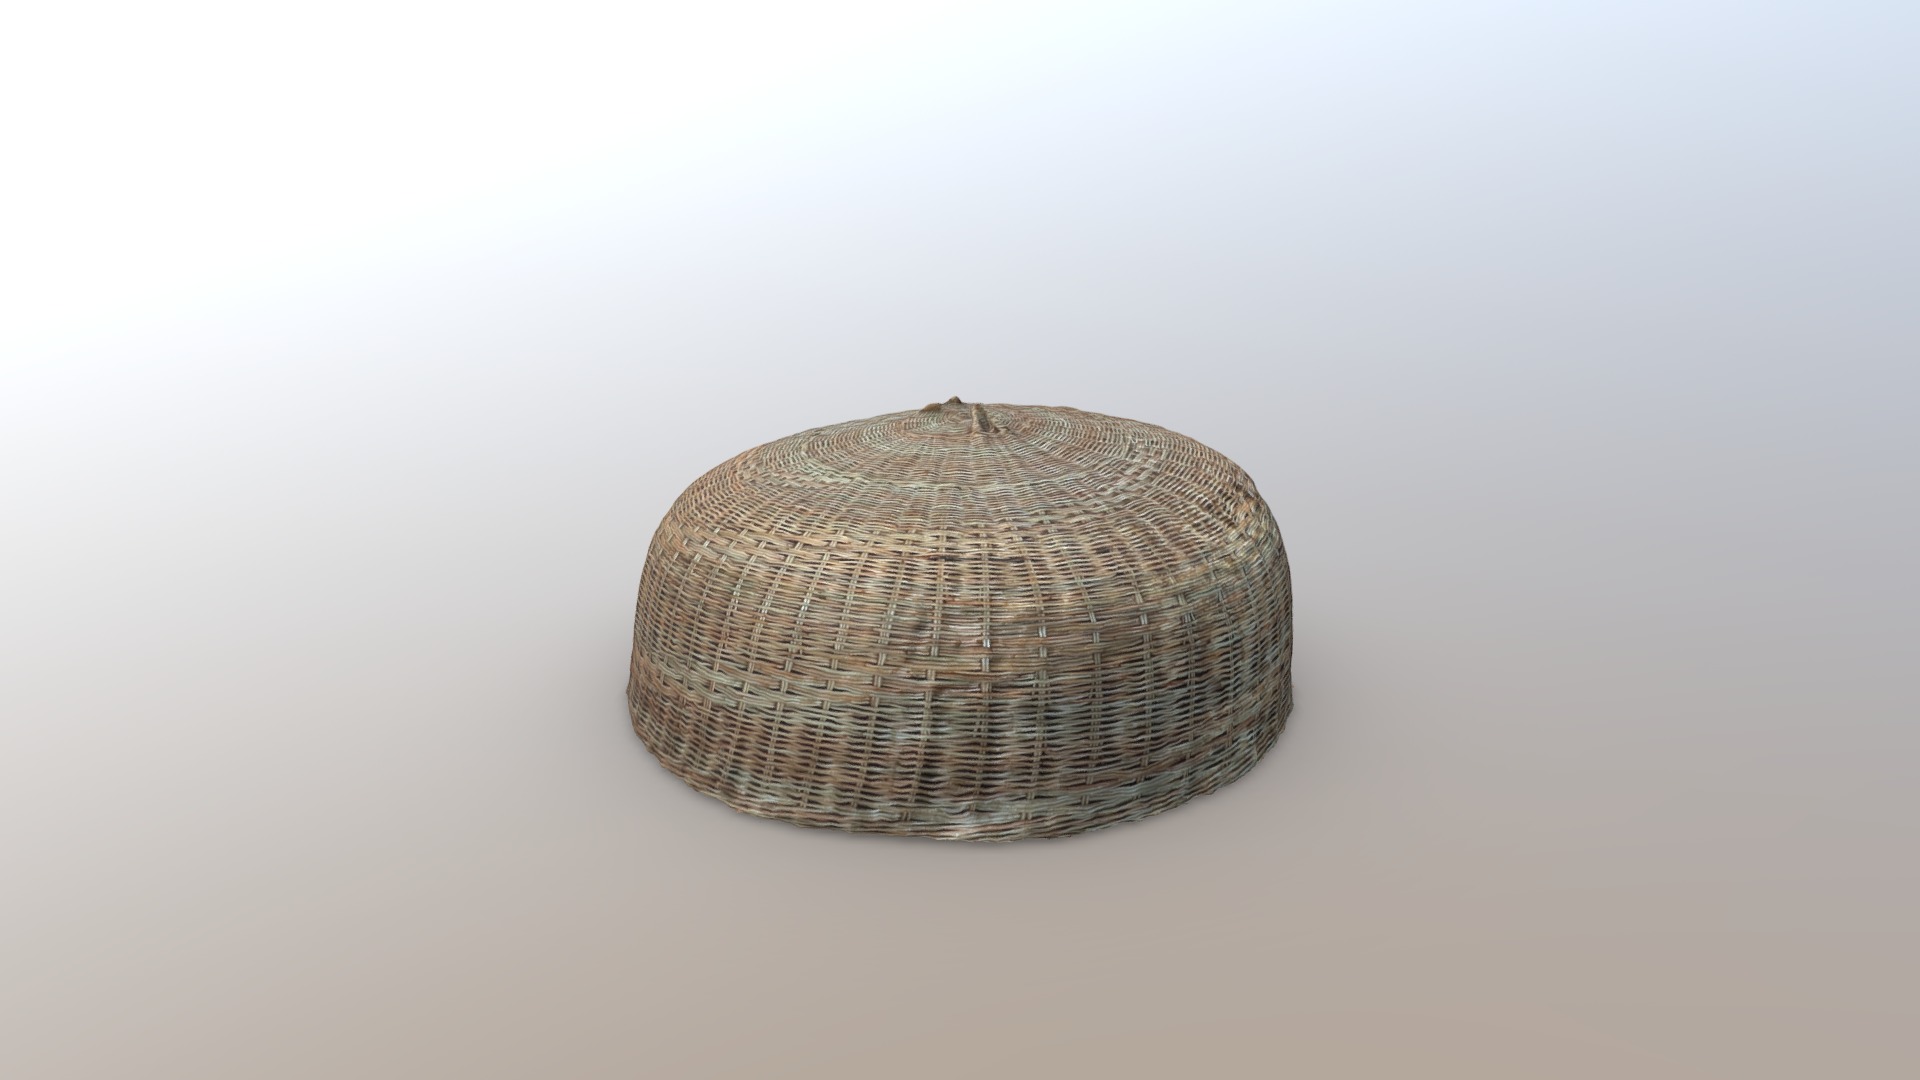 3D model Thai Kitchen Handcraft - This is a 3D model of the Thai Kitchen Handcraft. The 3D model is about a woven basket on a white background.